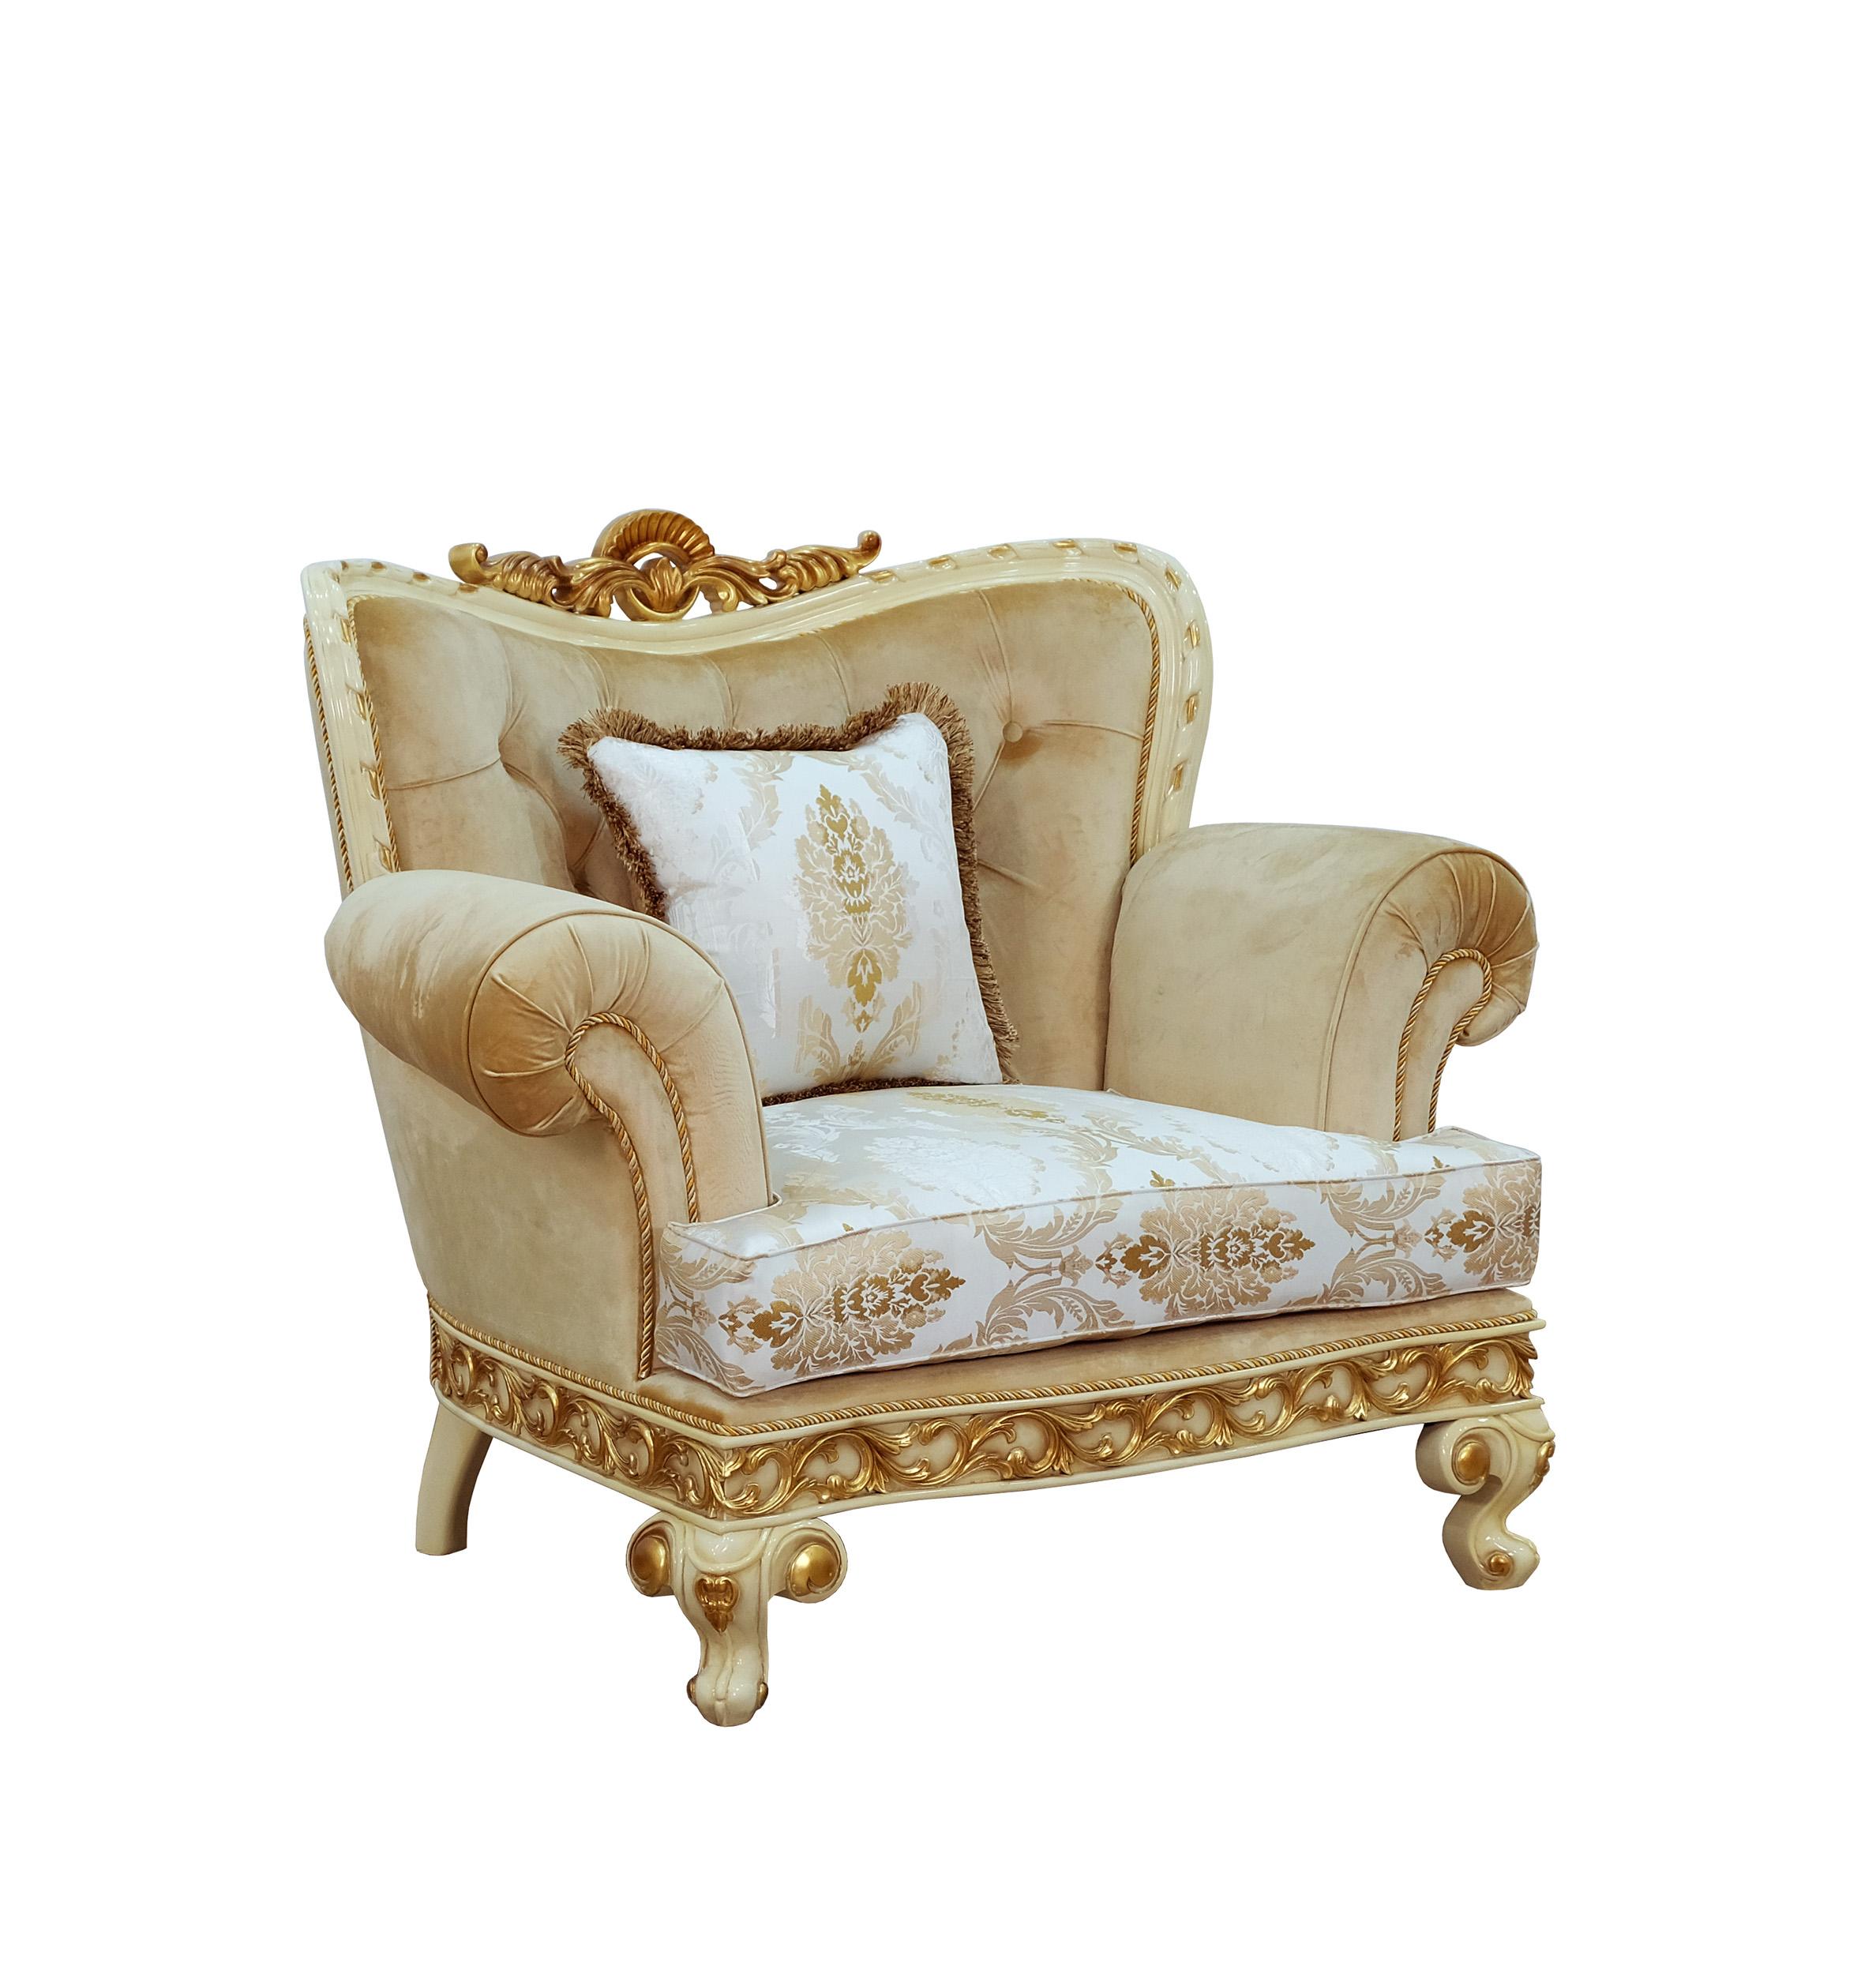 Classic, Traditional Arm Chair FANTASIA 40015-C in Off-White, Sand, Gold Fabric